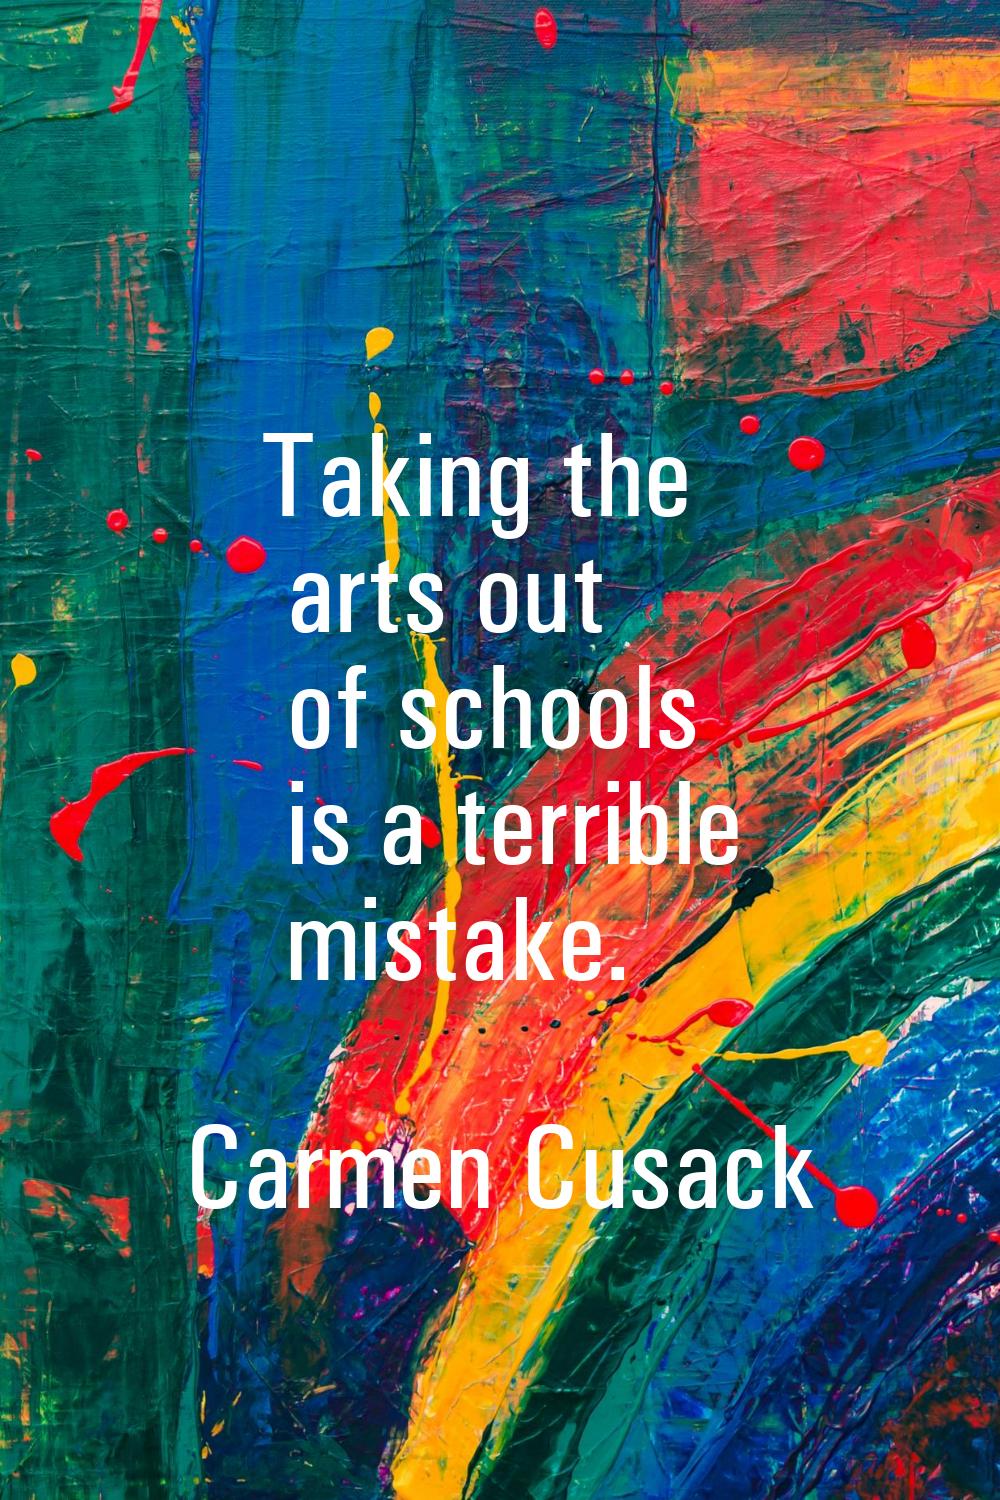 Taking the arts out of schools is a terrible mistake.